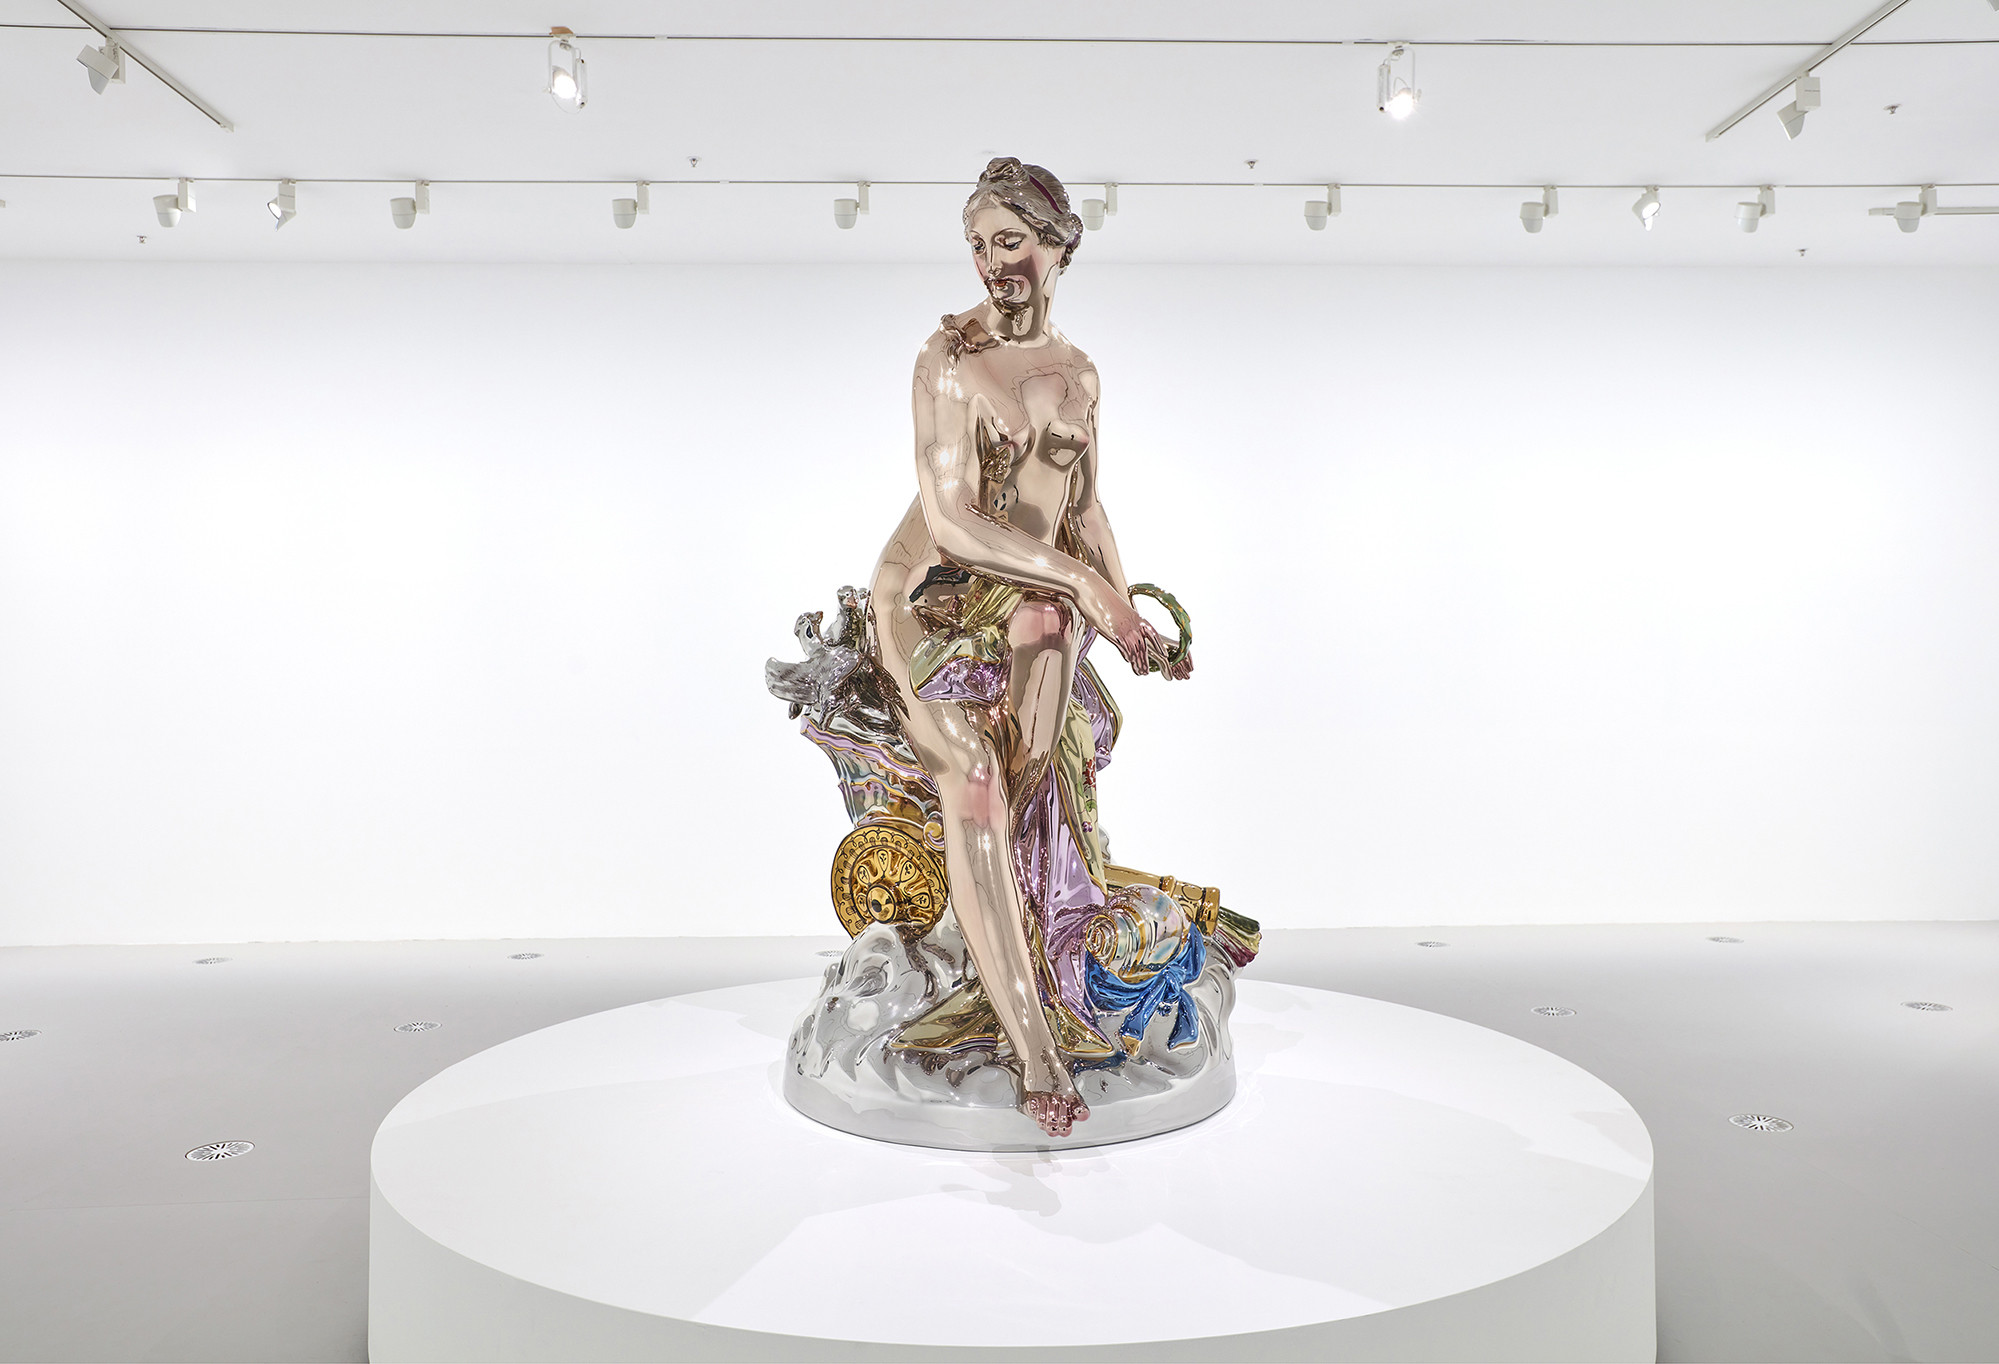 Jeff Koons's 'Easyfun-Ethereal' on View at the Gagosian